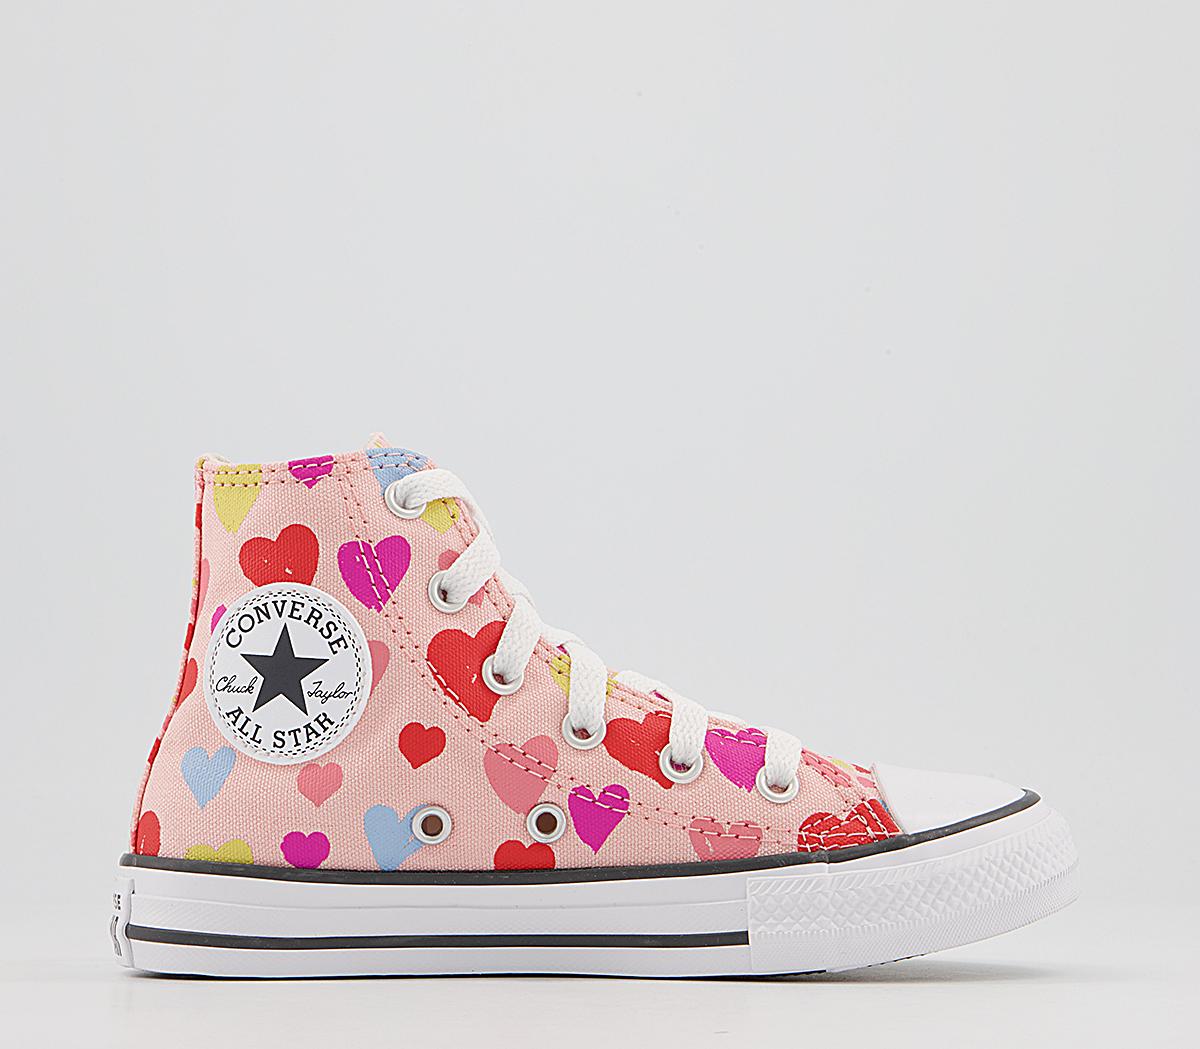 ConverseAll Star Hi Youth TrainersStorm Pink Natural Ivory Storn White Hearts